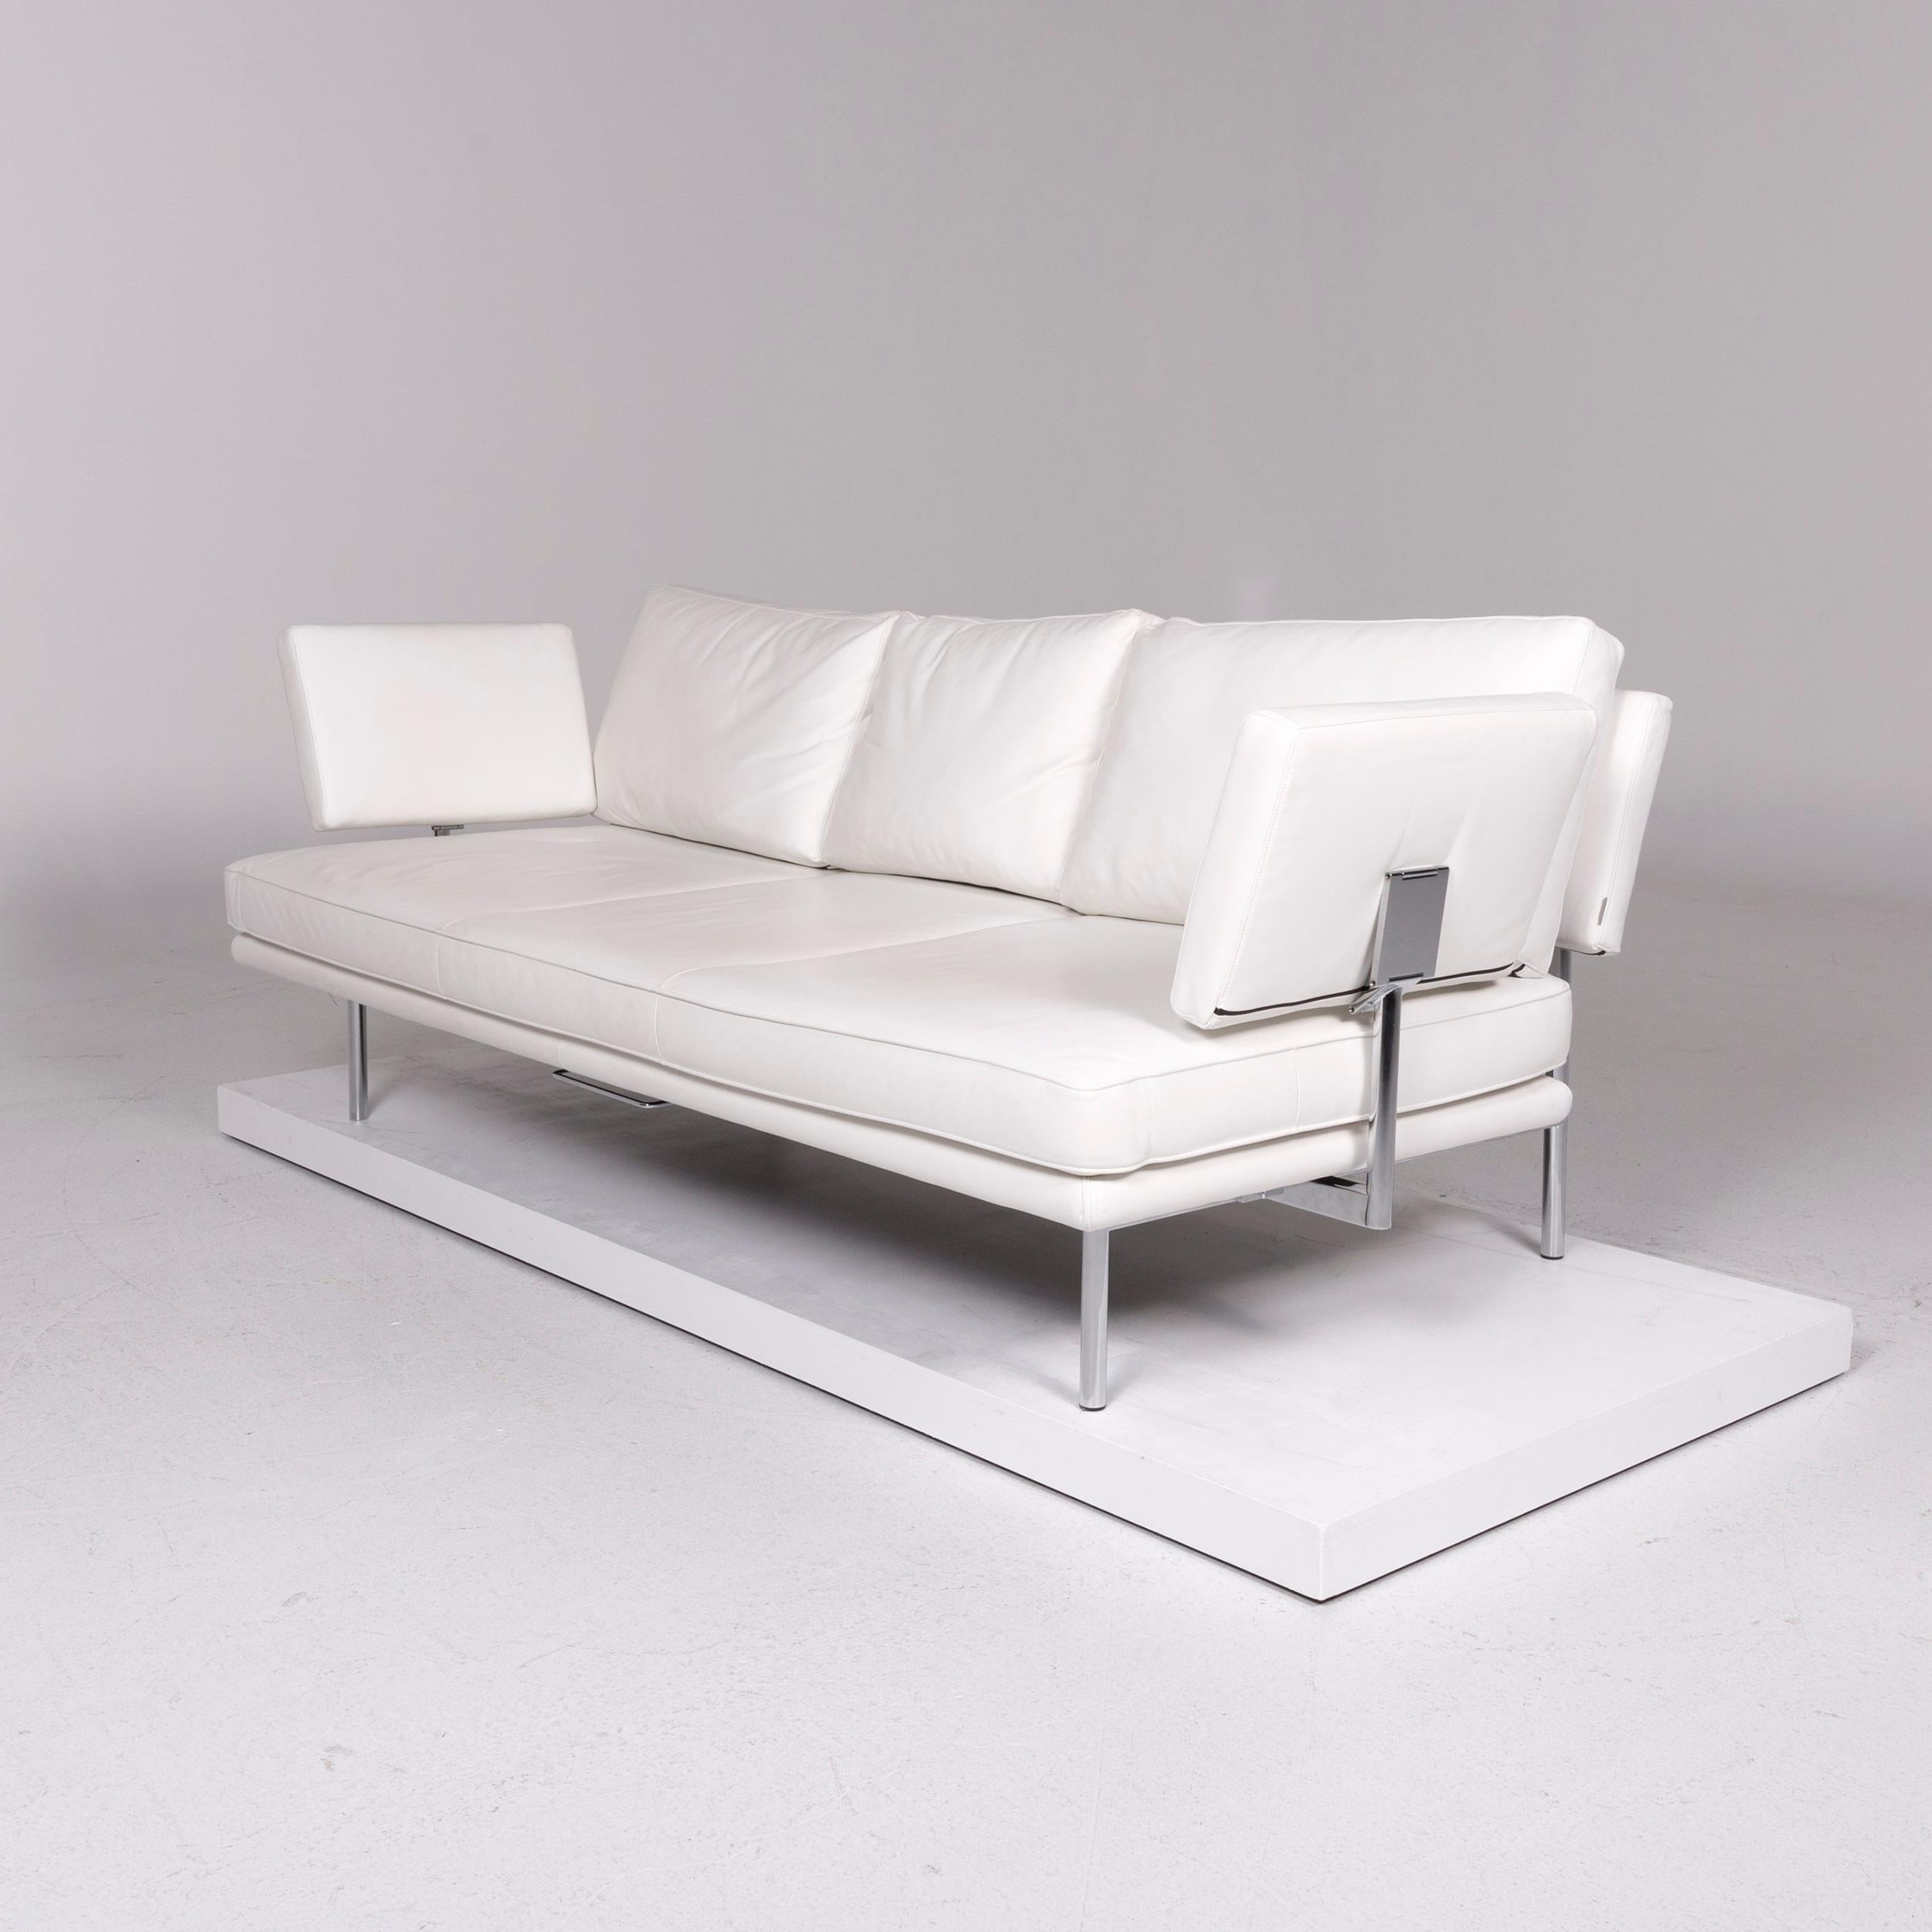 German Walter Knoll Living Platform Leather Sofa White Three-Seat Function Couch For Sale